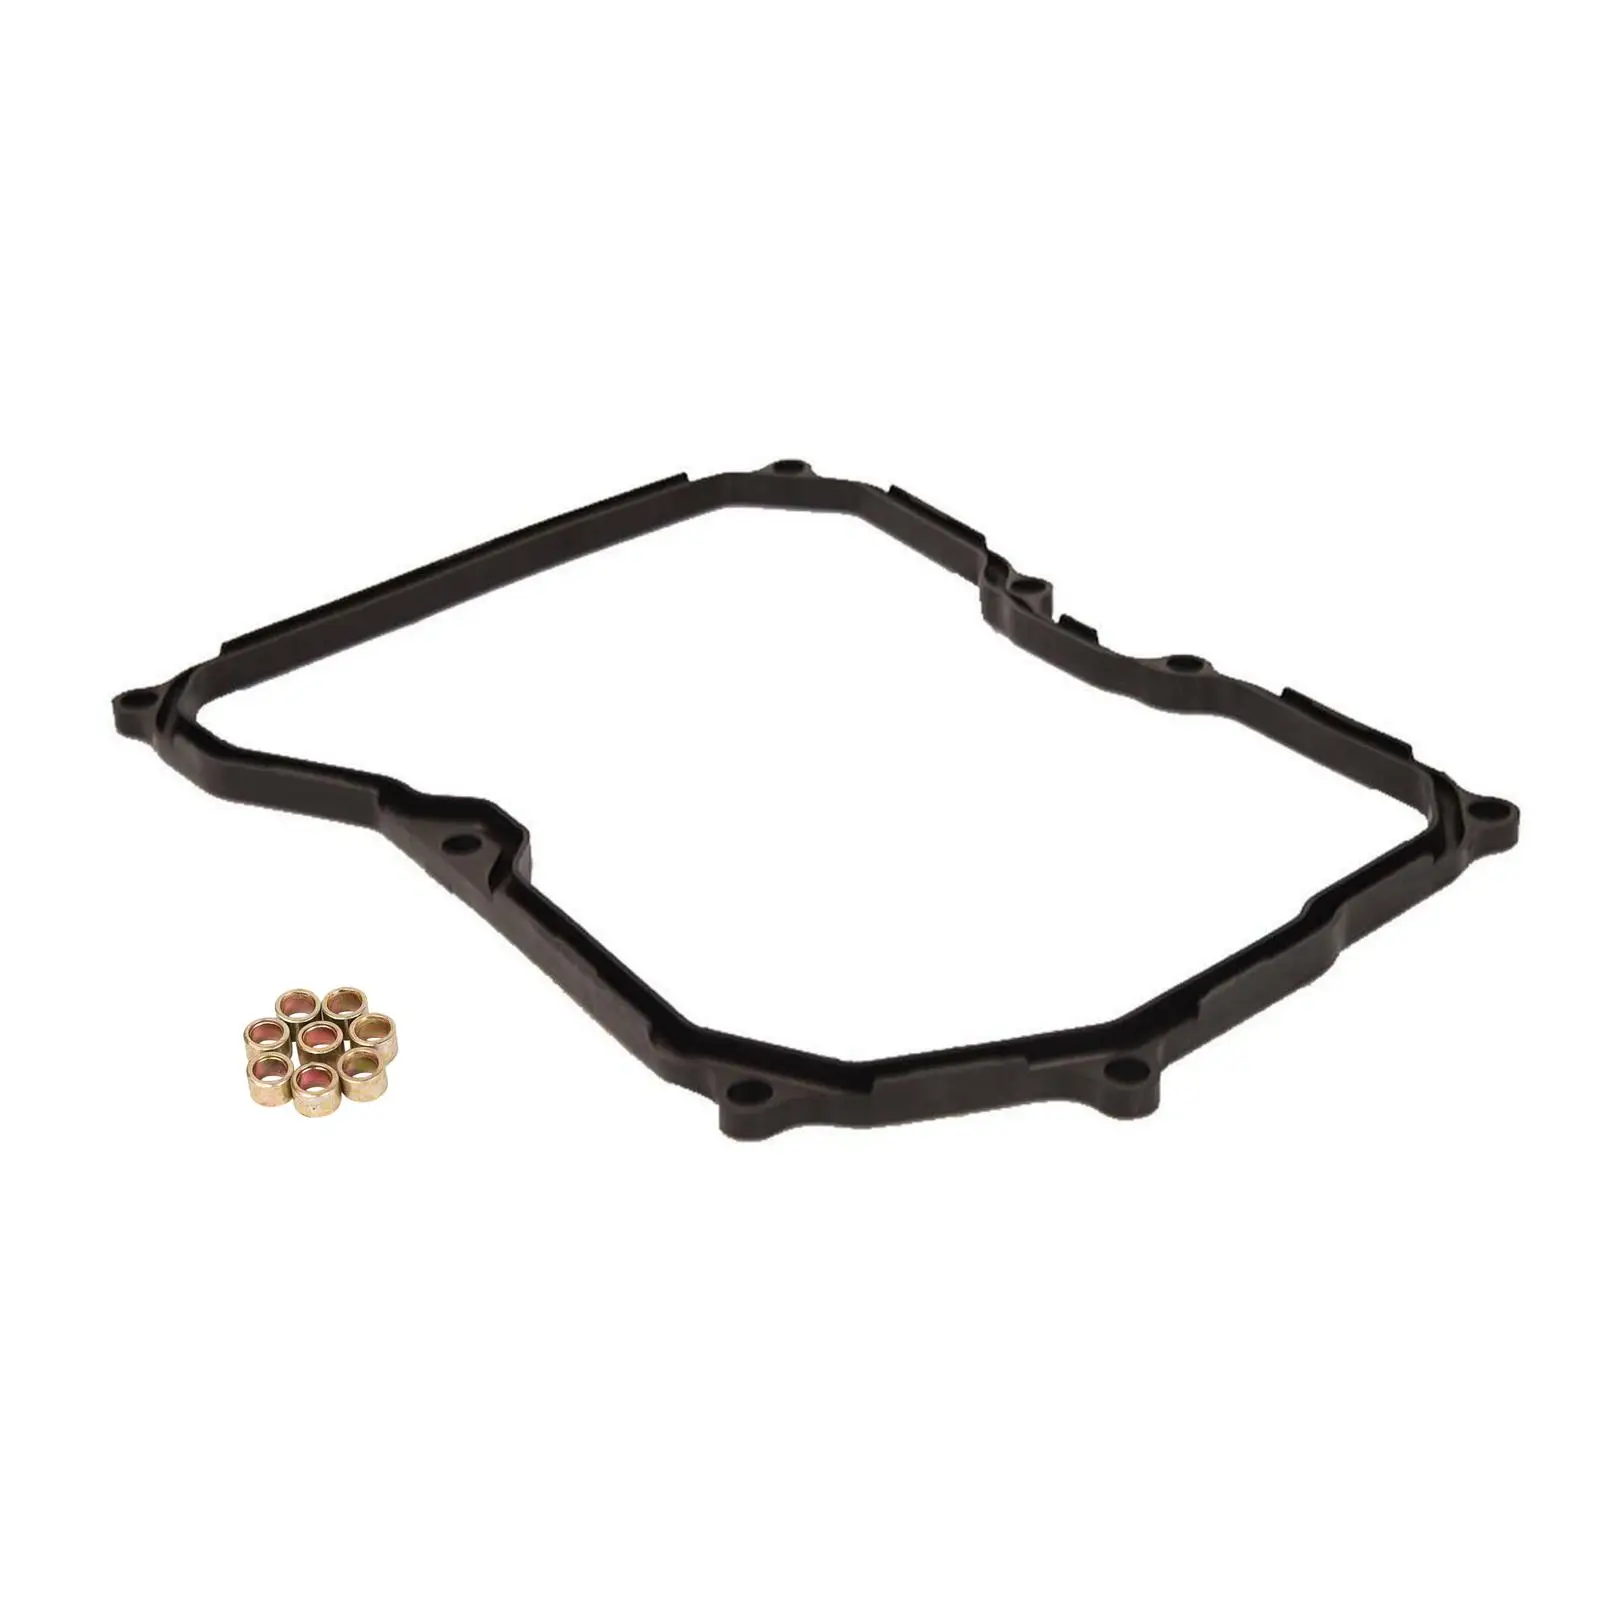 Transmission Pan Gasket Lightweight for Mini 2007+ Replace Accessories